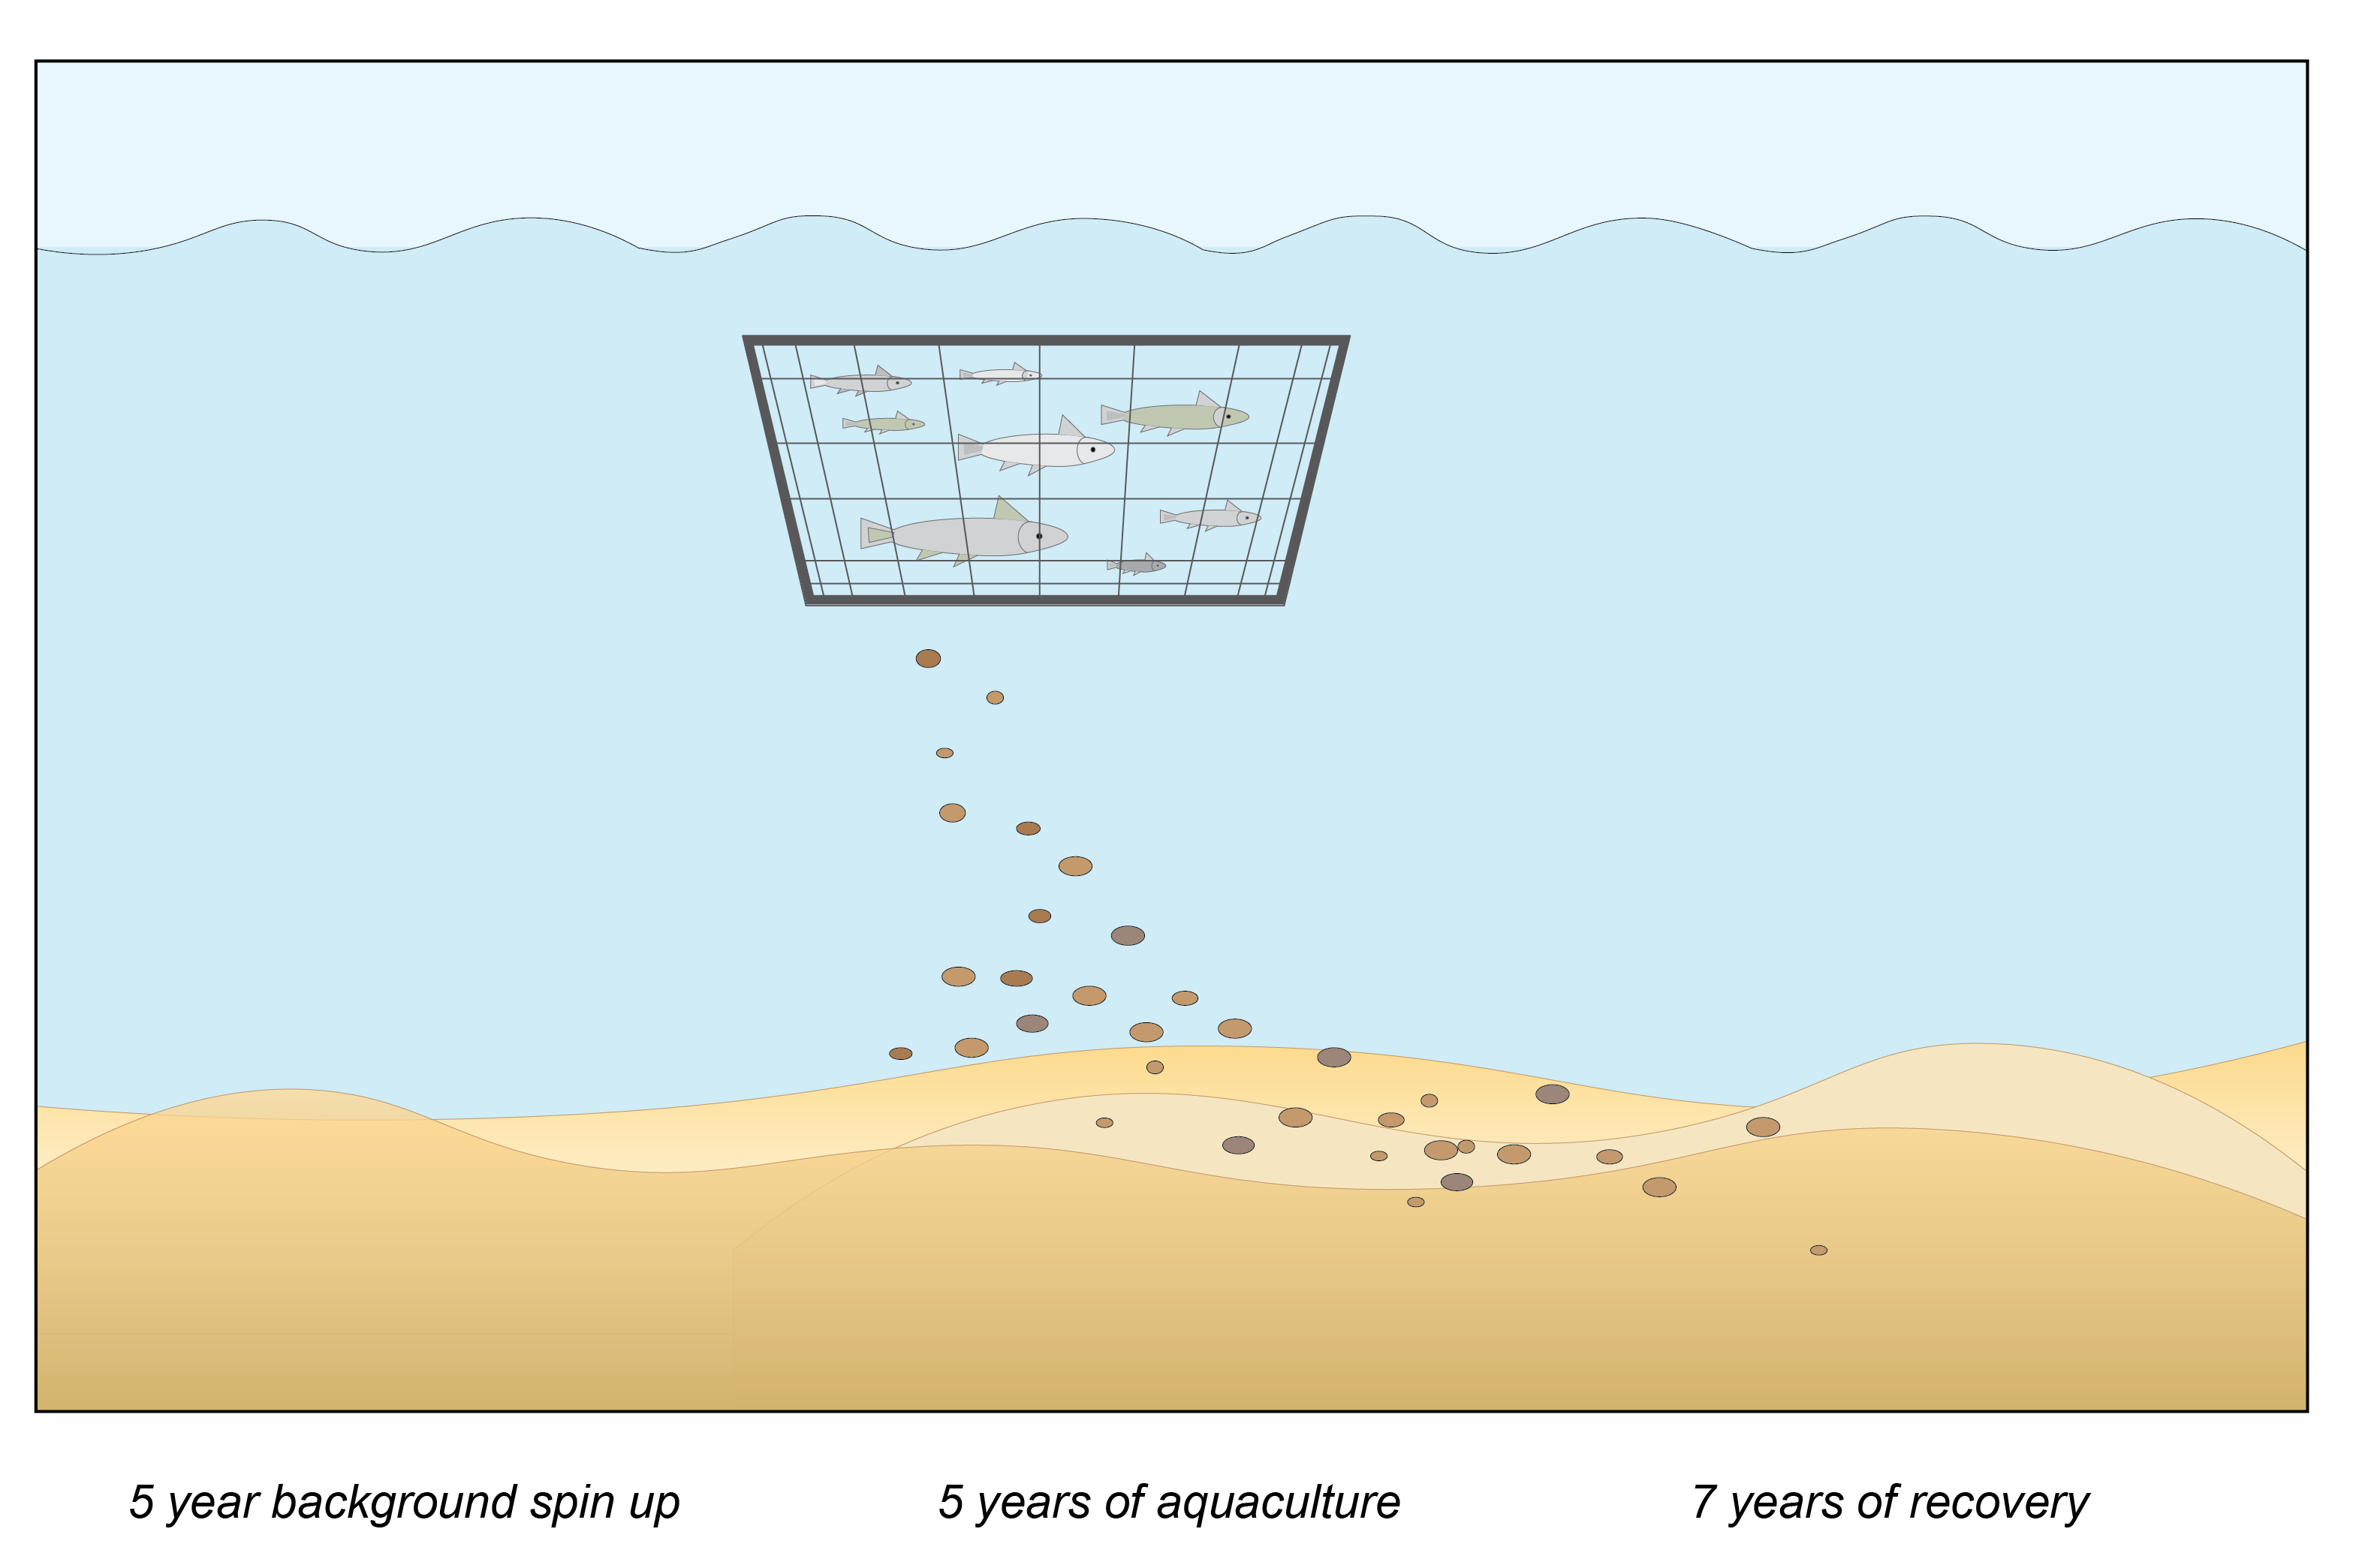 Schematic of the design of the aquaculture simulation. The simulation had a period of spin up, a period of aquaculture and then a recovery period.